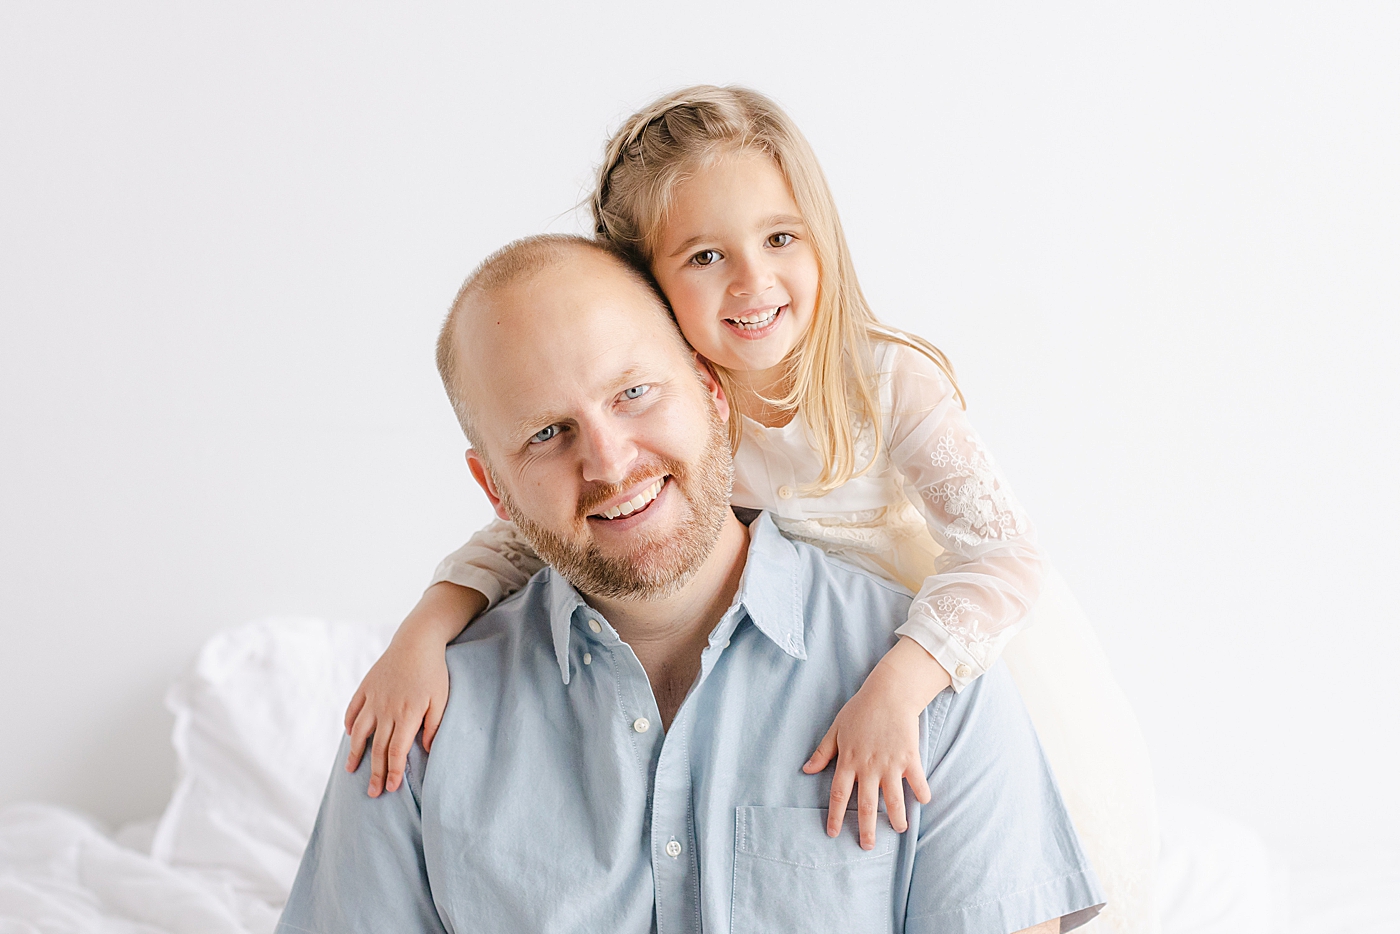 Dad and daughter smiling during their playful family studio session in Austin | Photo by Sana Ahmed Photography